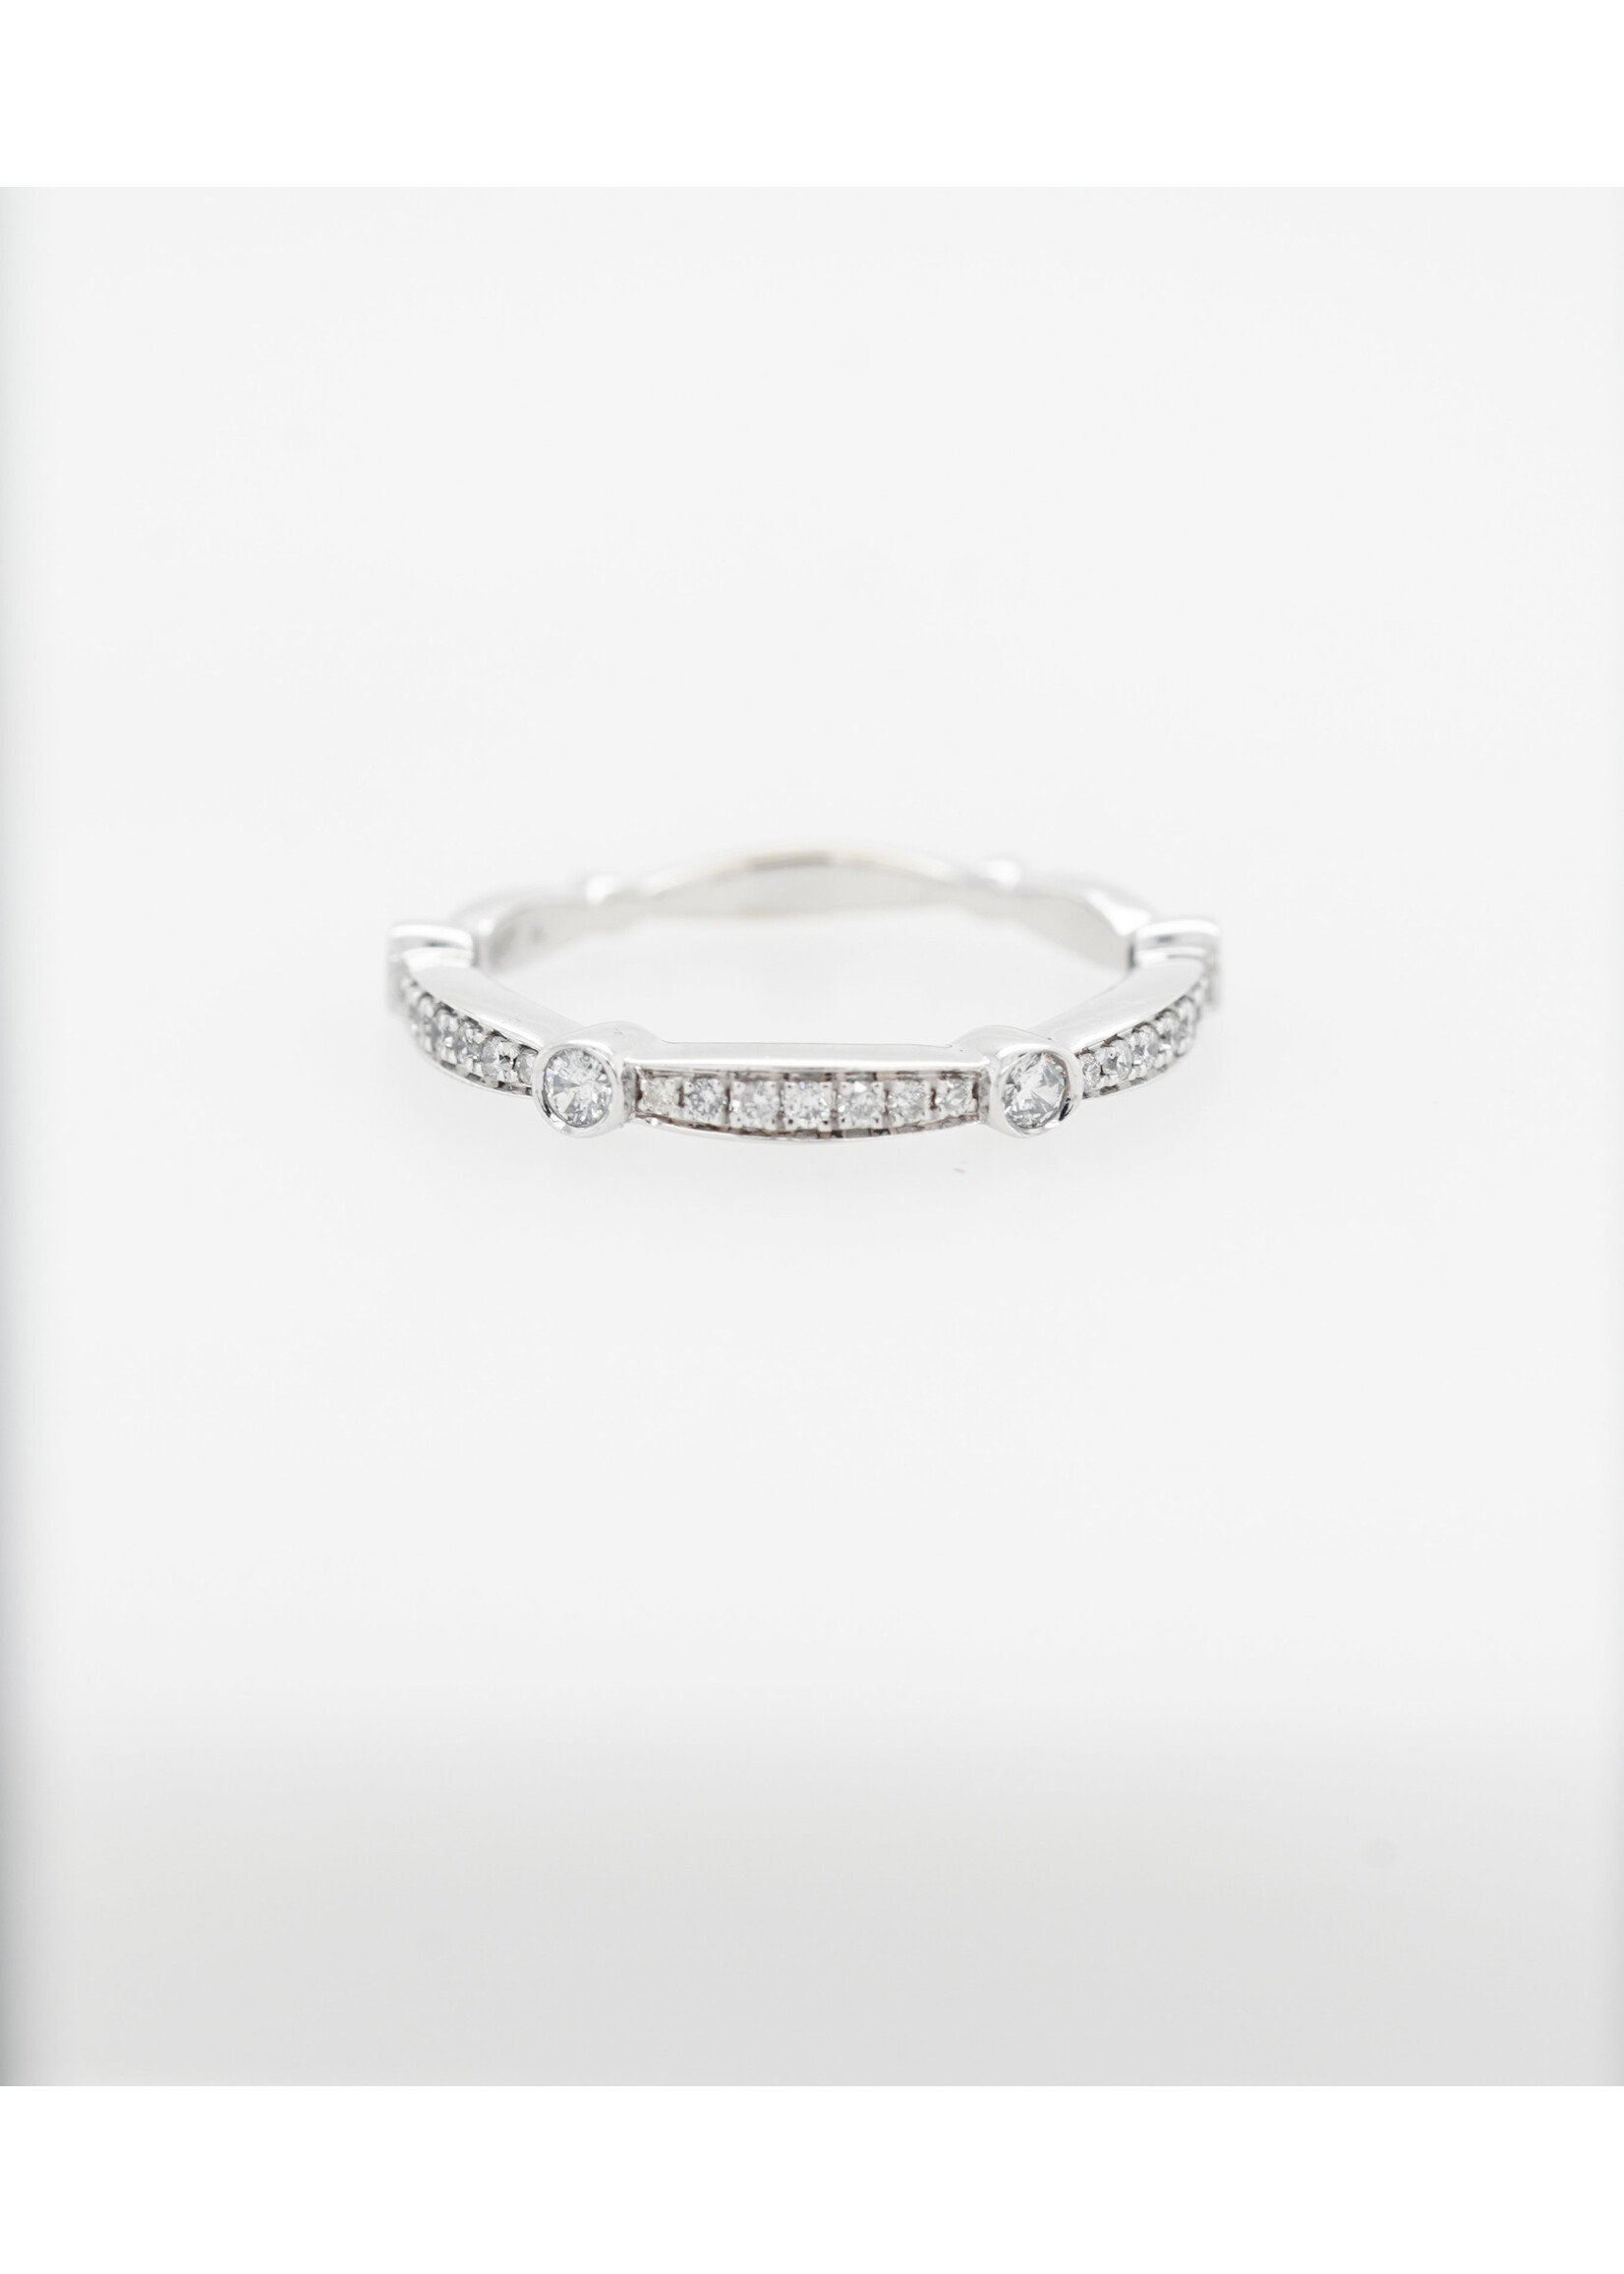 14KW 2.4g .30tw Diamond Stackable Band (size 7)